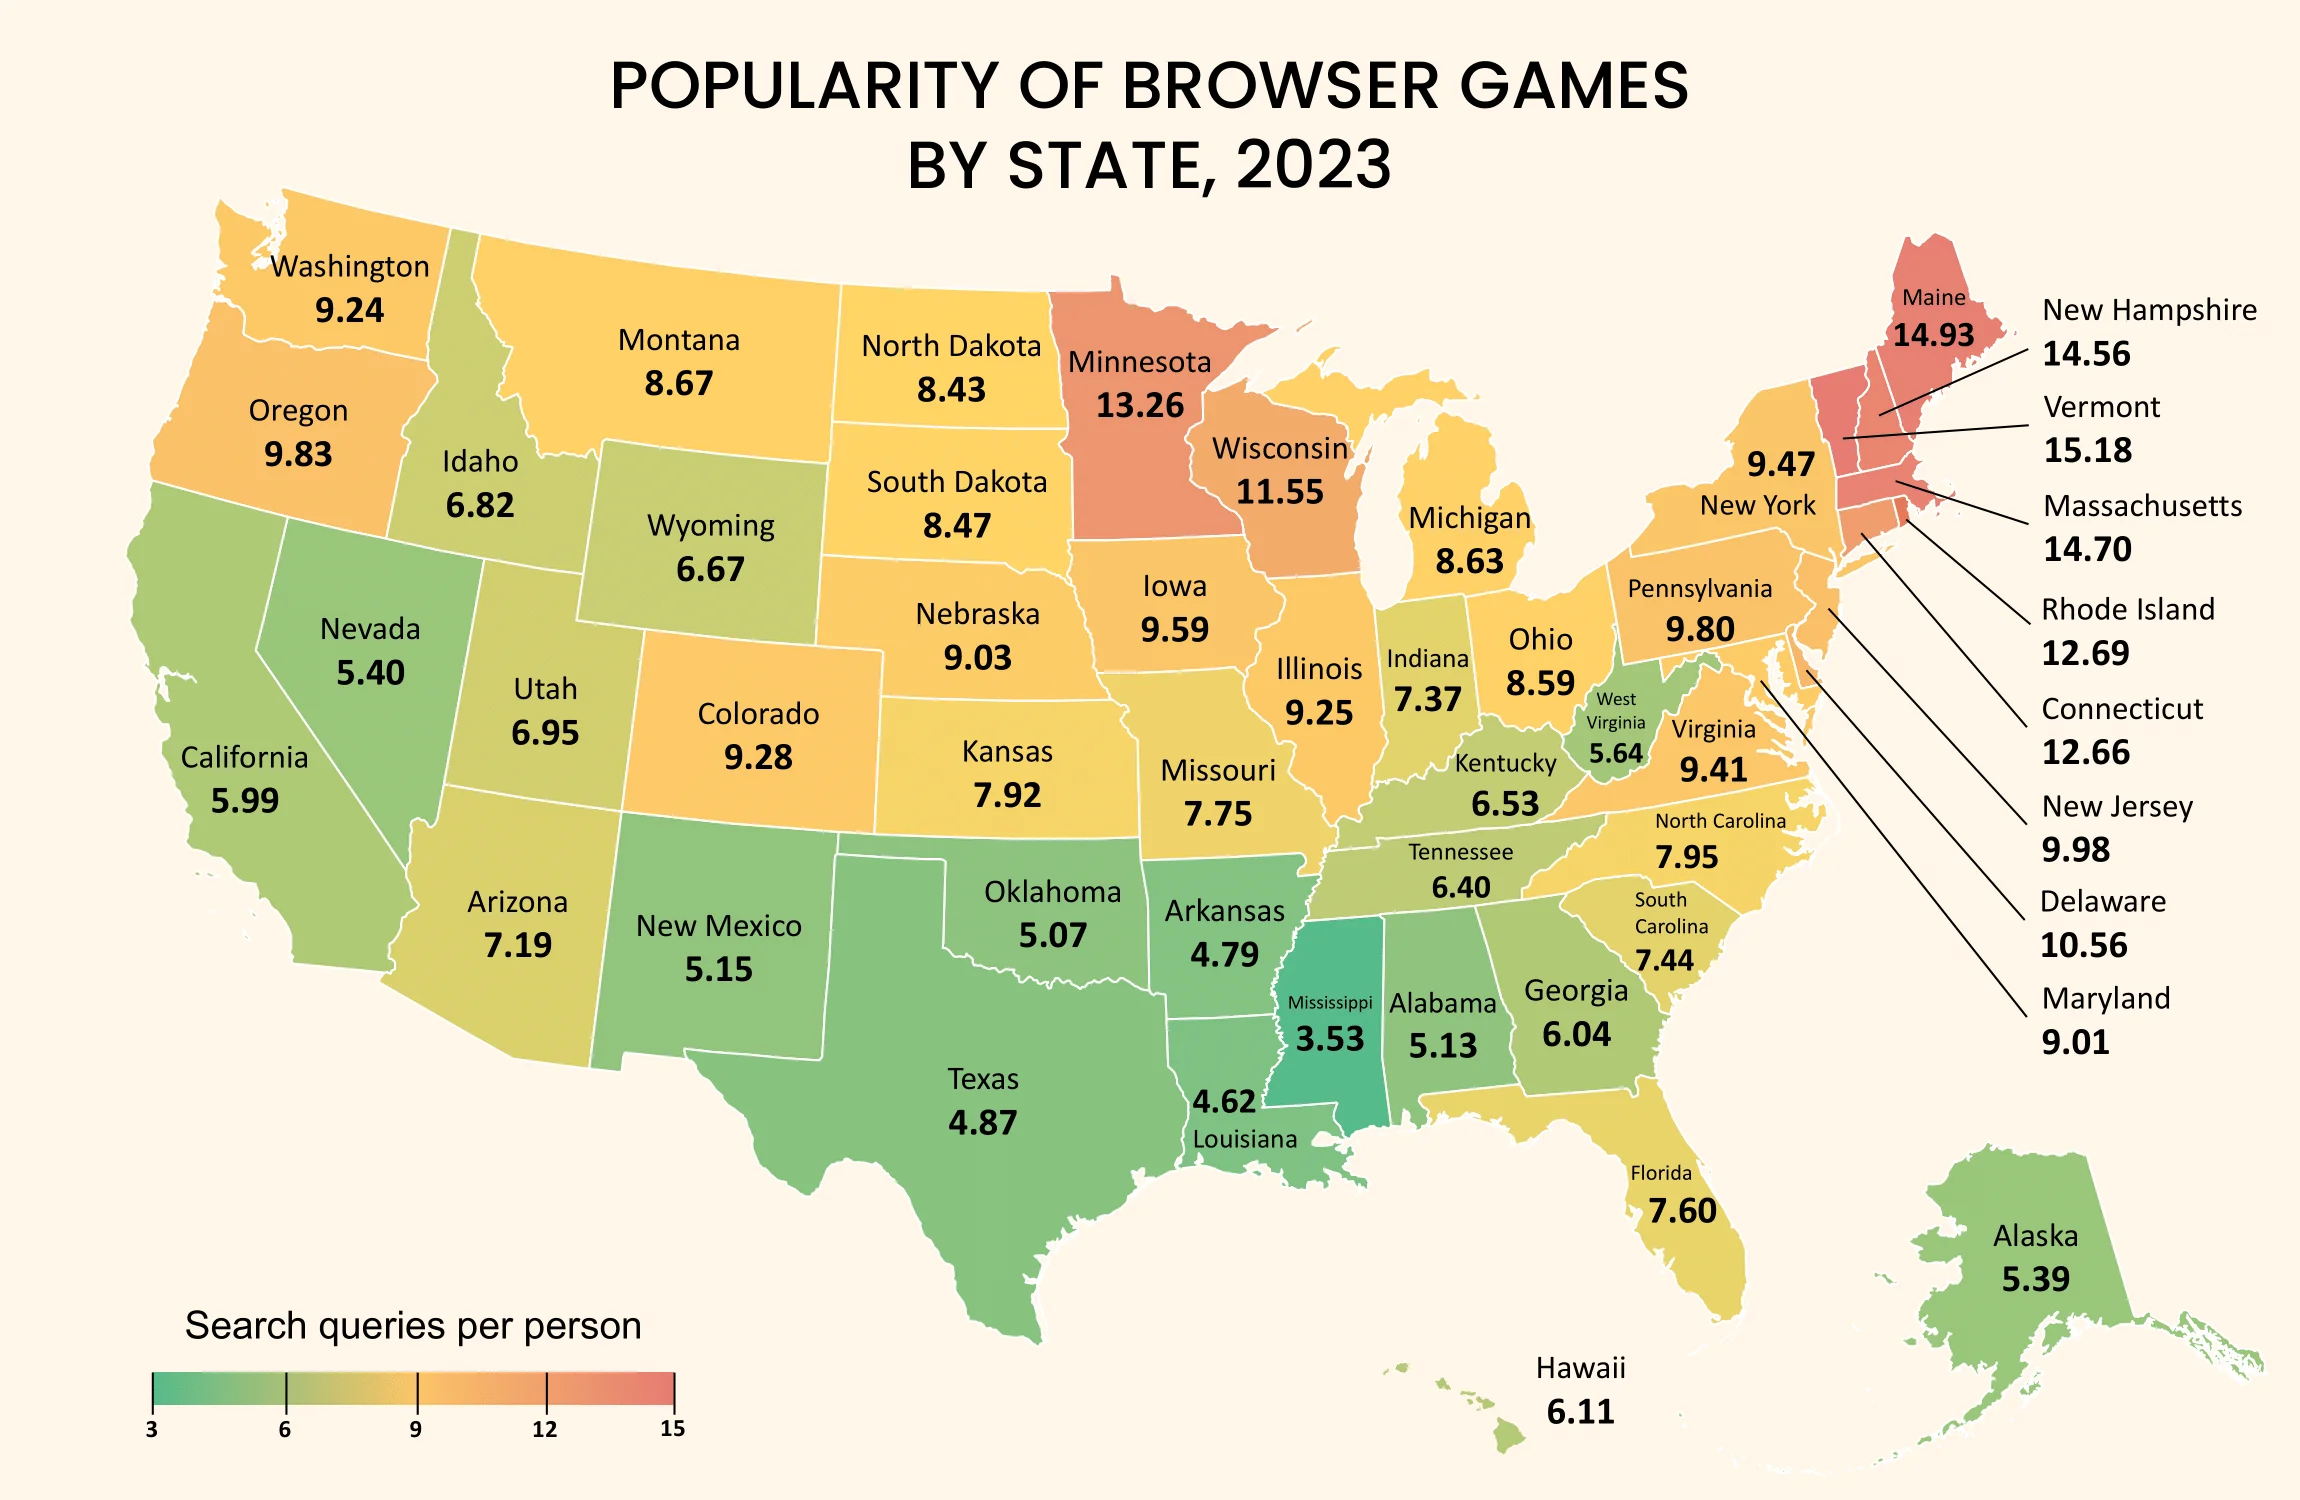 Popularity of browser games by states, 2023